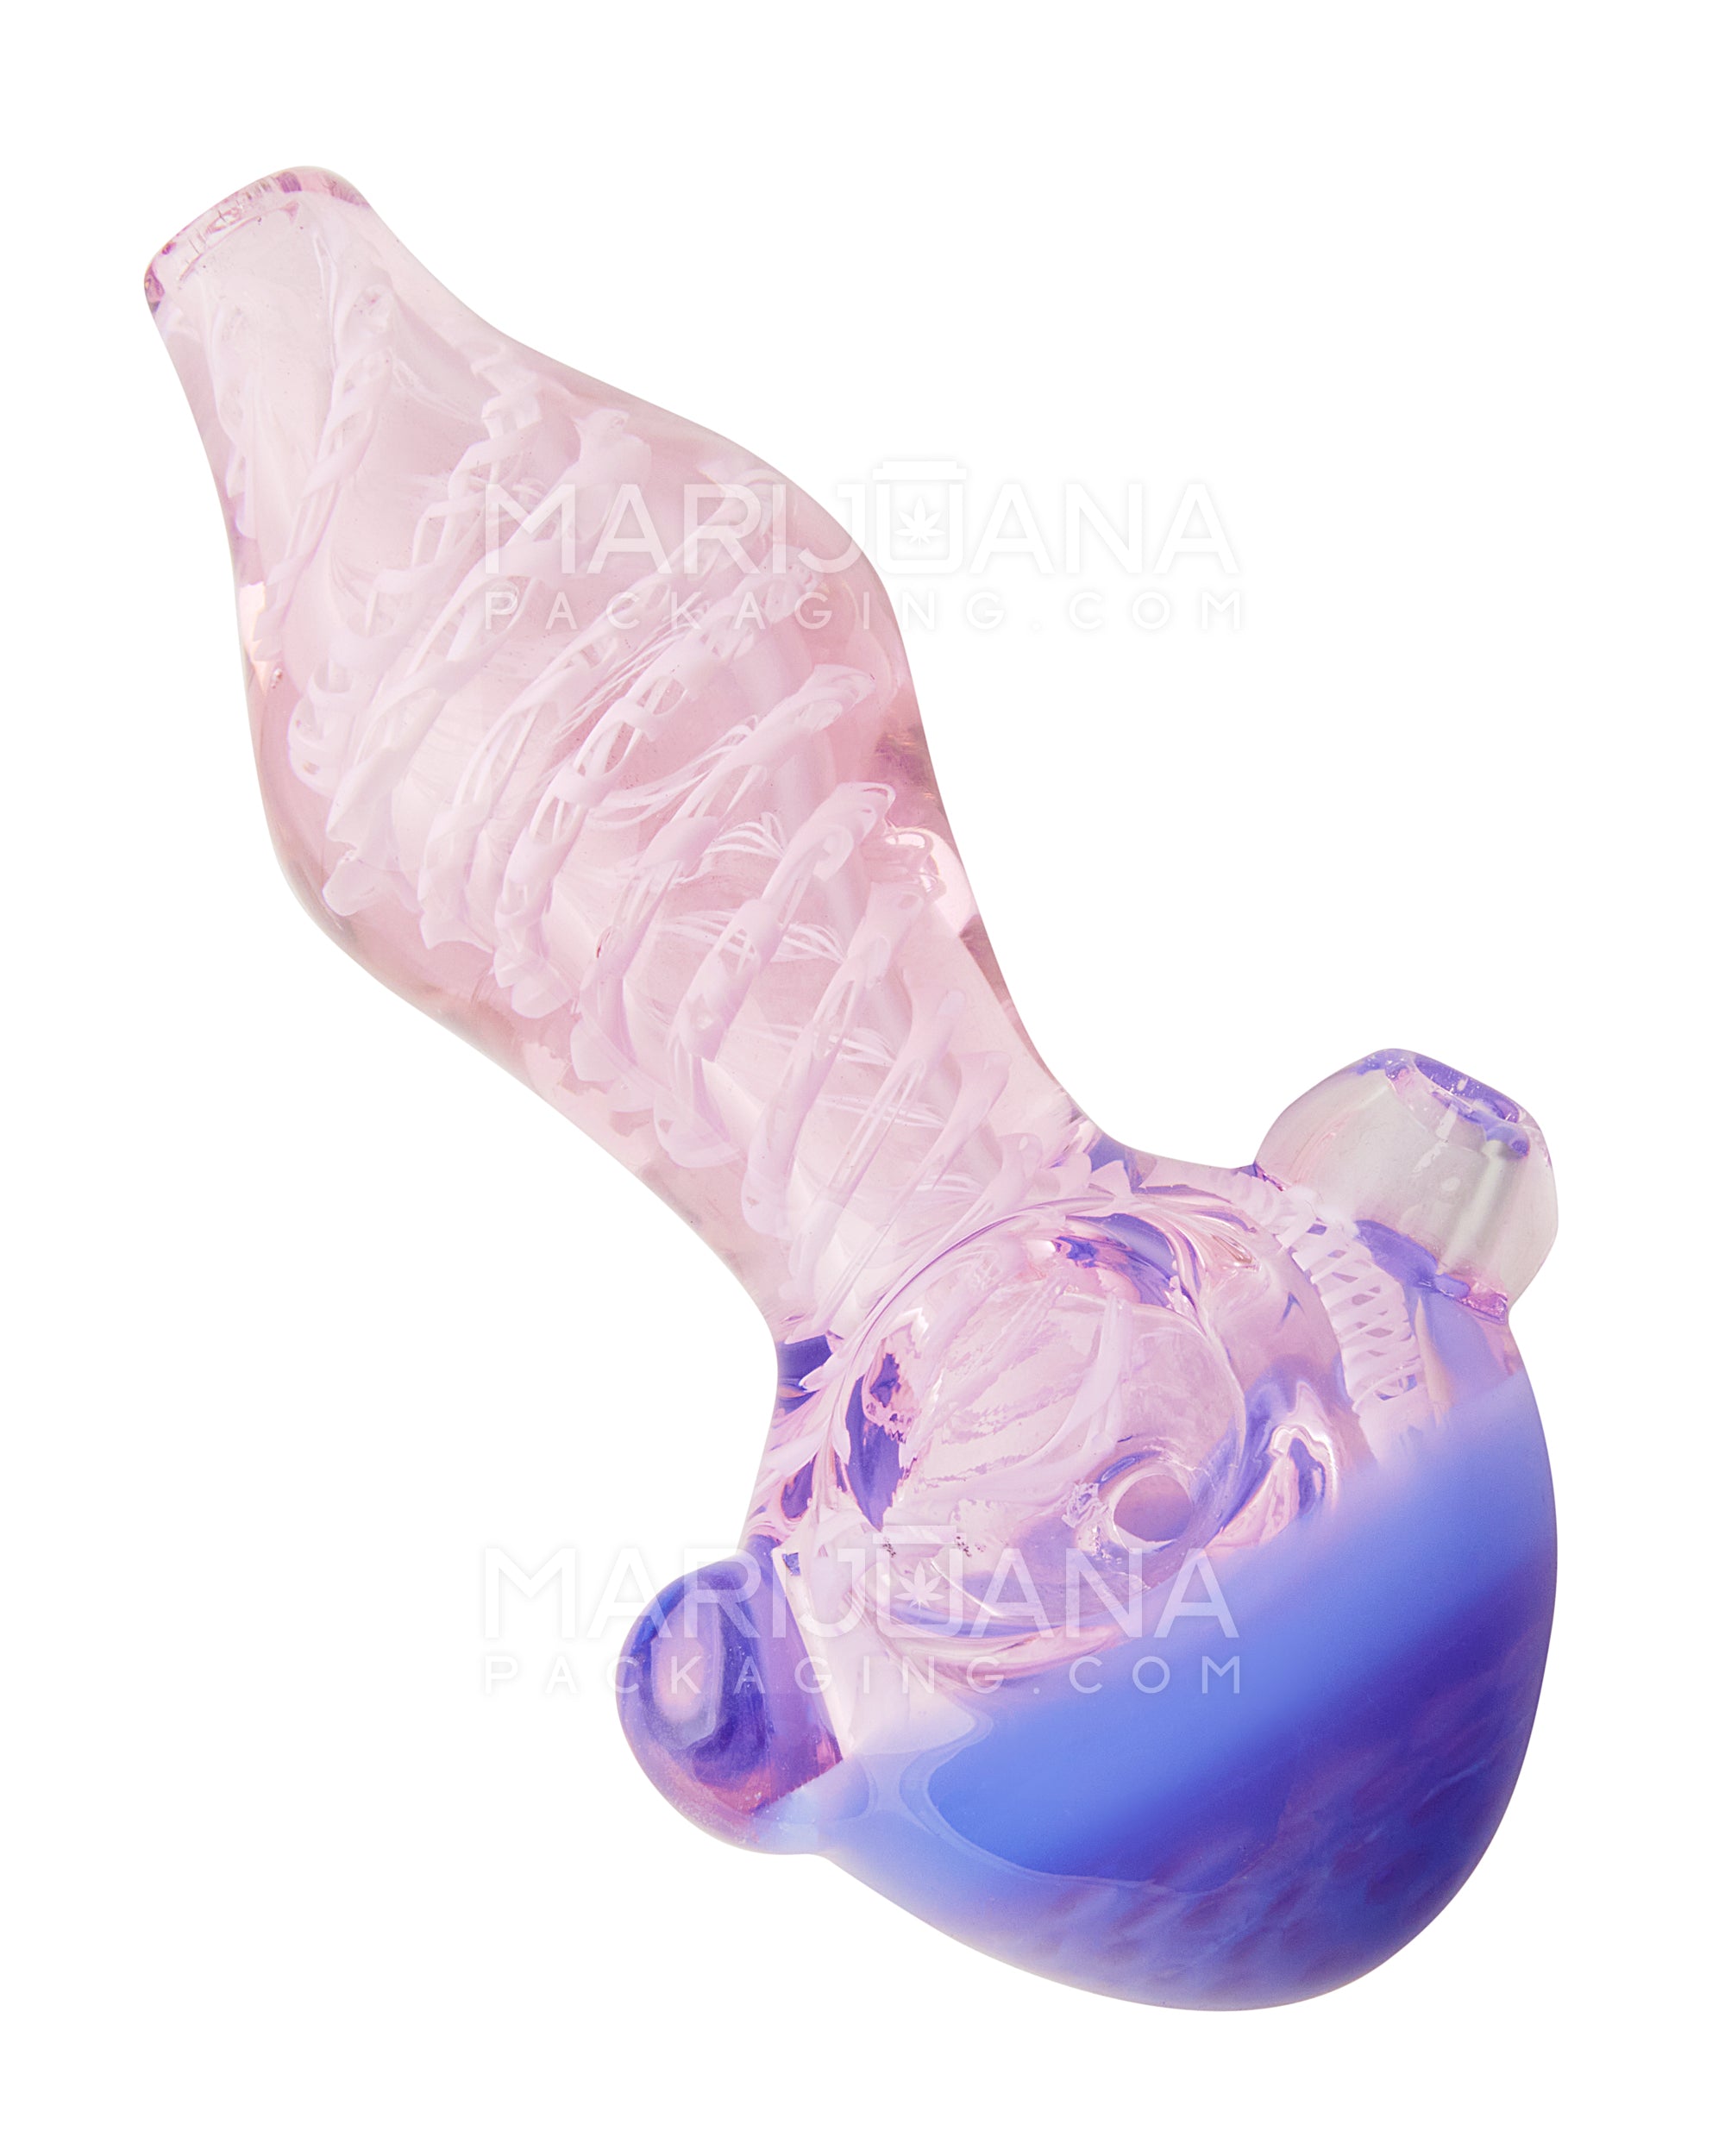 Ribboned Striped Honeycomb Bowl Hand Pipe | 4.5in Long - Glass - Assorted